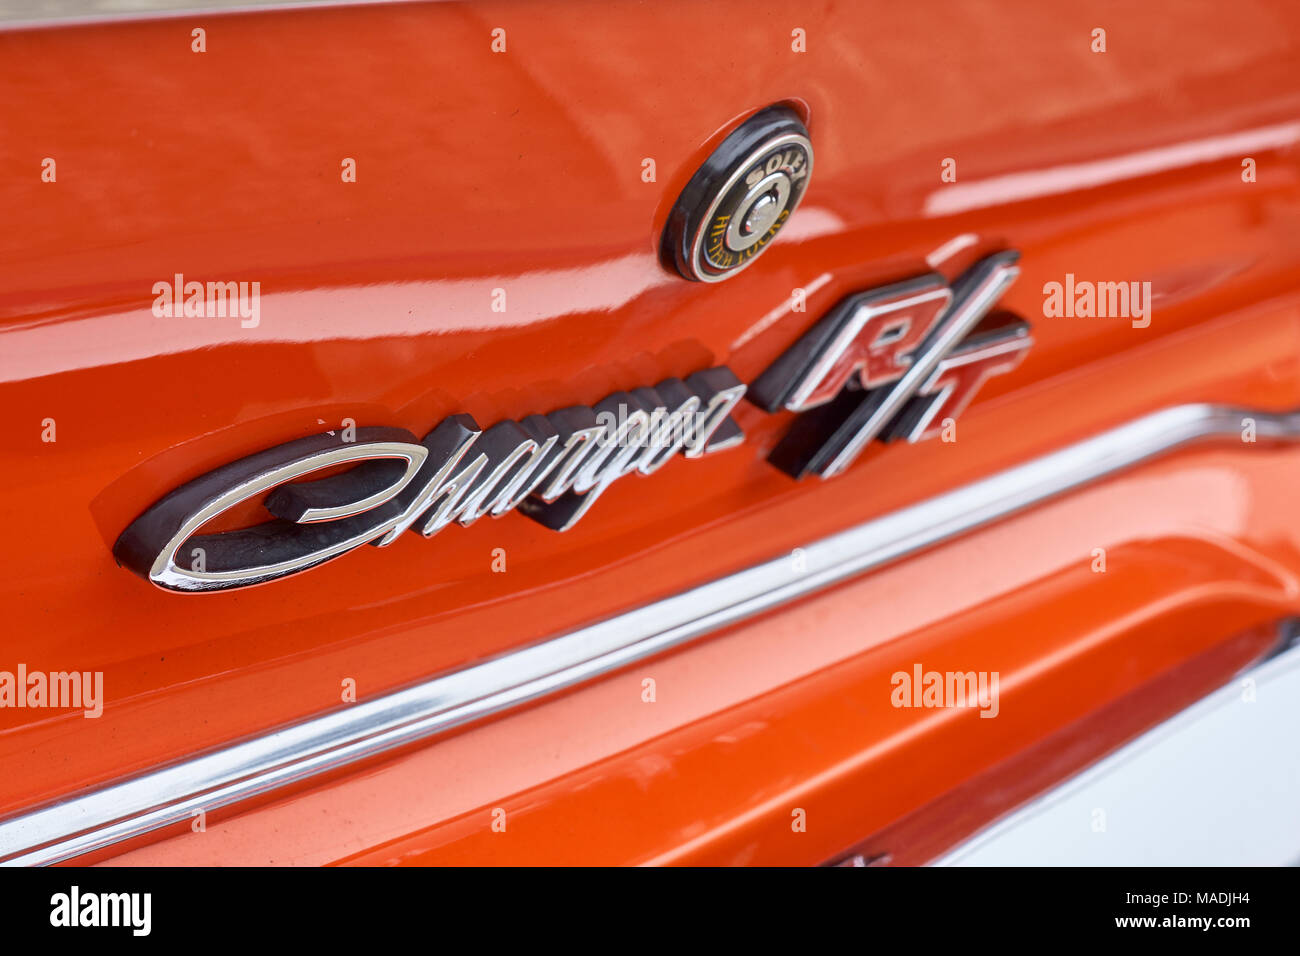 detail image of an orange dodge charger r/t Stock Photo